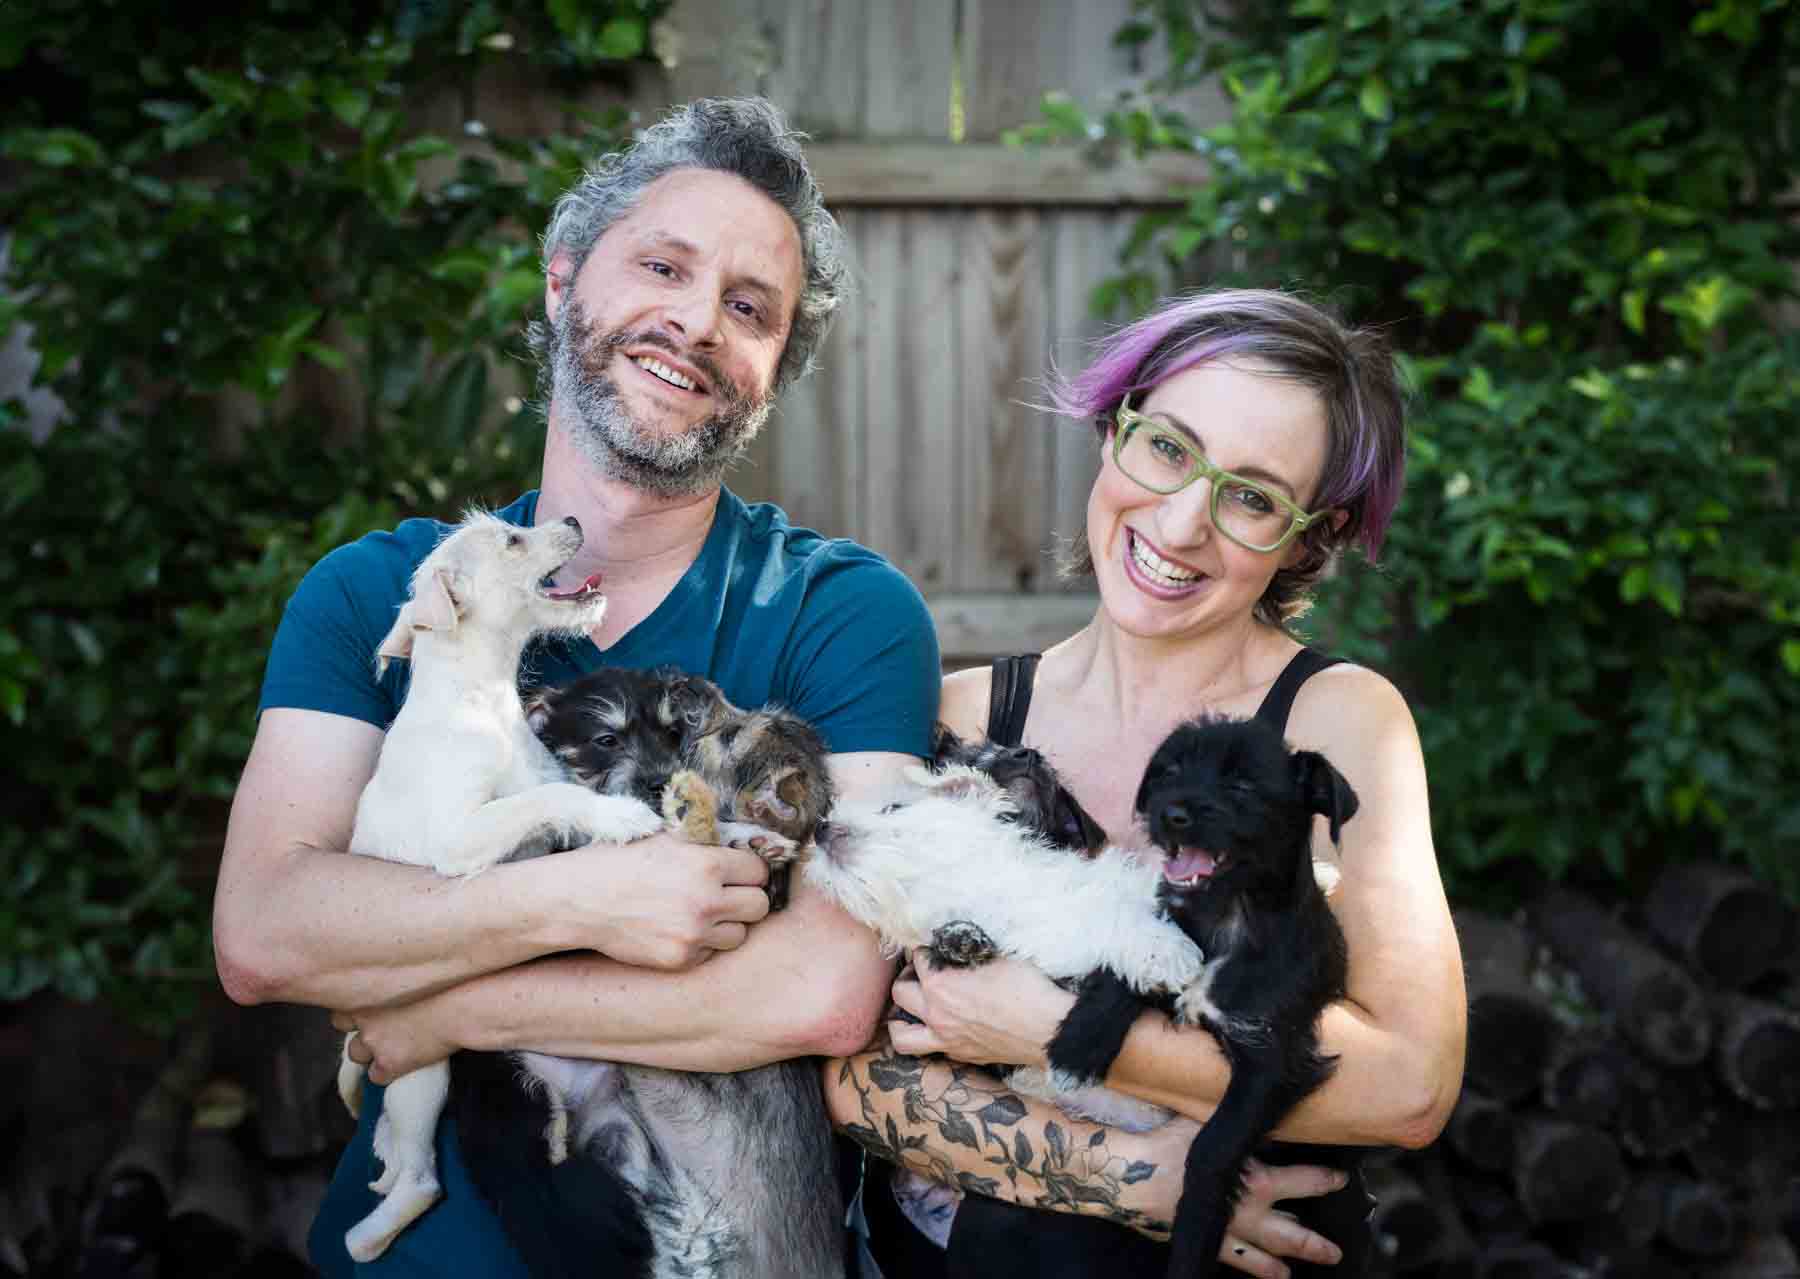 Man and woman holding puppies in their arms in front of wooden fence for an article on pet photo tips